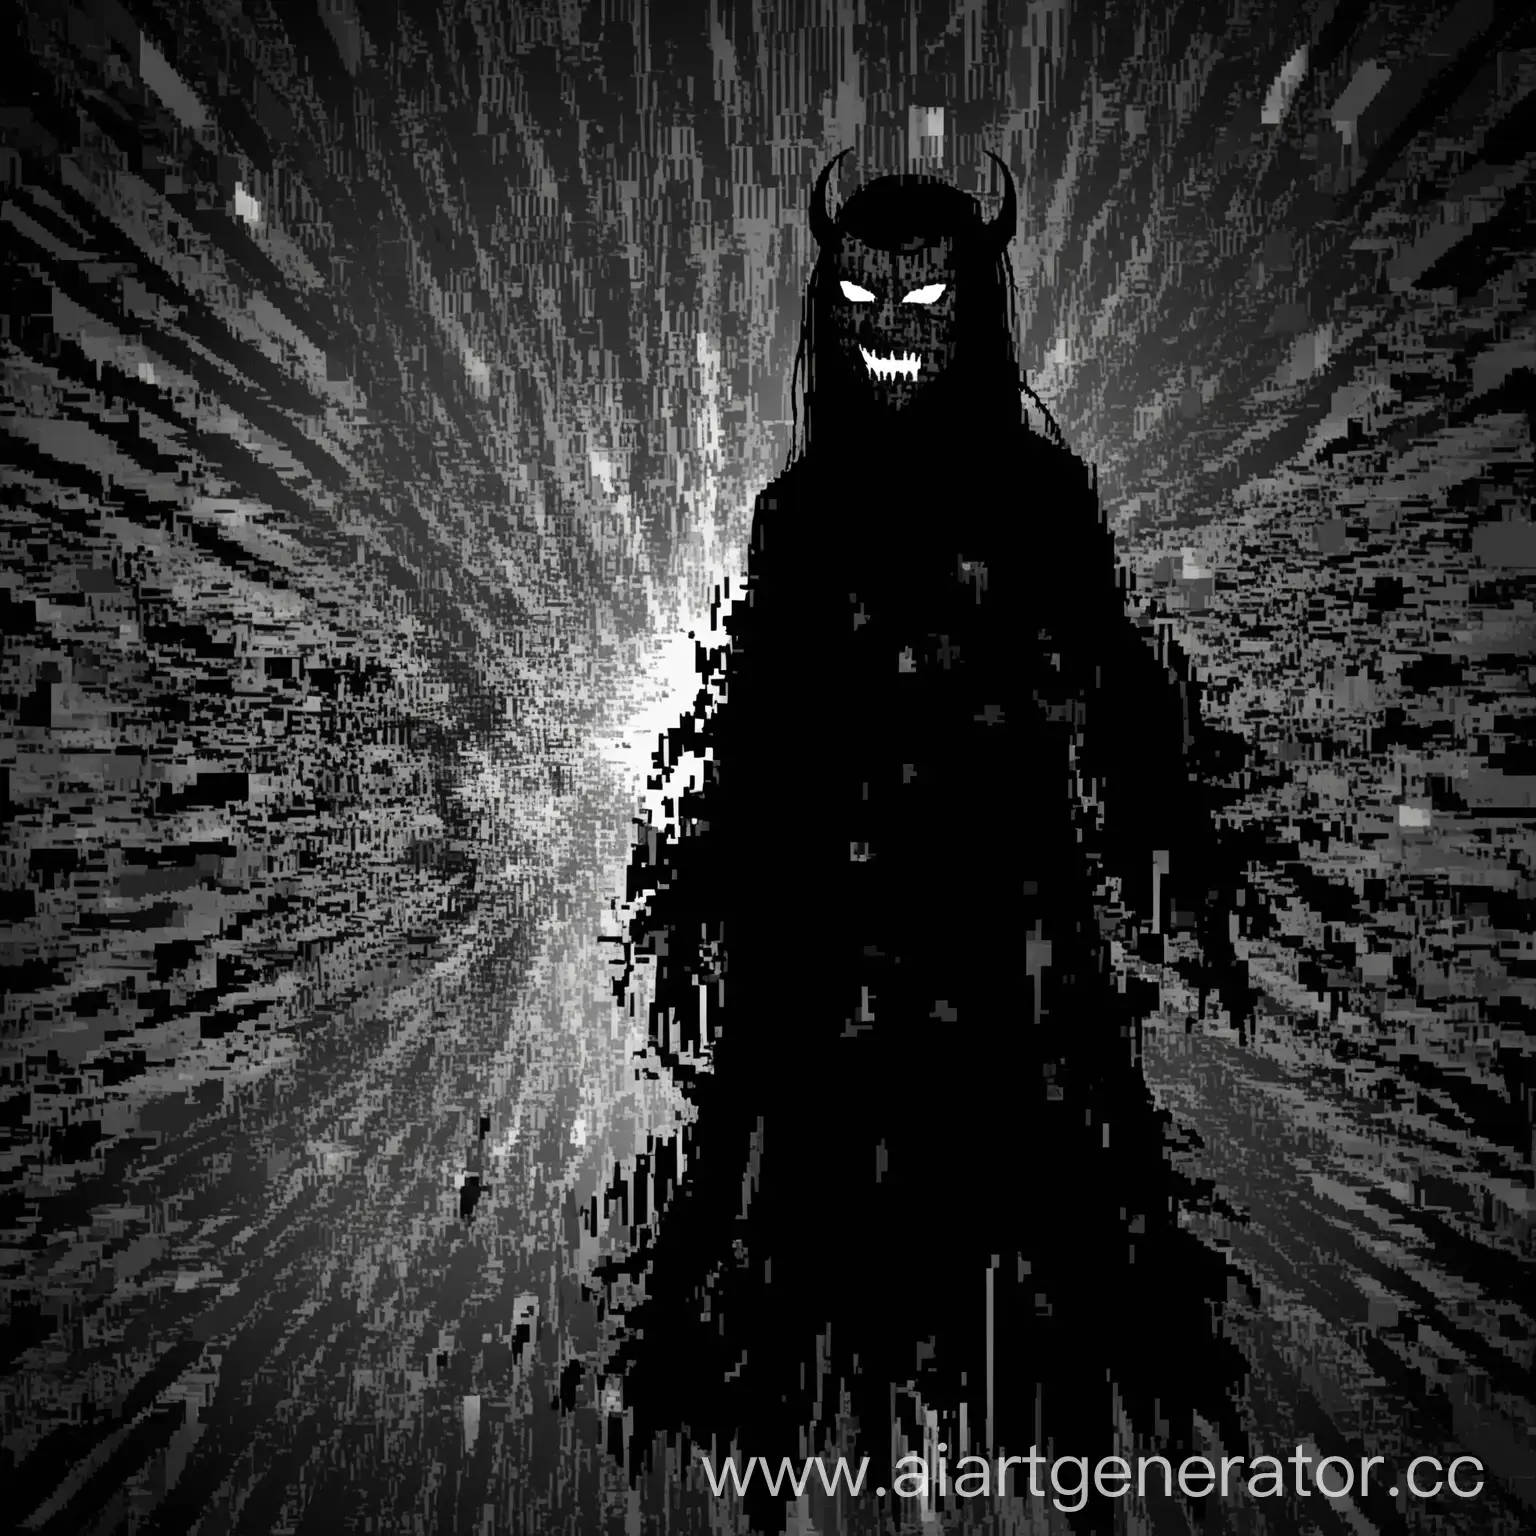 Silhouette: Resembles Kusunoki (half human, half demon). Face: - Mask, occasionally becomes transparent. - Scarred face with cuts by the mouth. Eyes: Black sclera, white pupils. Hair: Long, dark. Clothing: Black cloak, disintegrating into pixels. Effects: Glitches and illusions around.